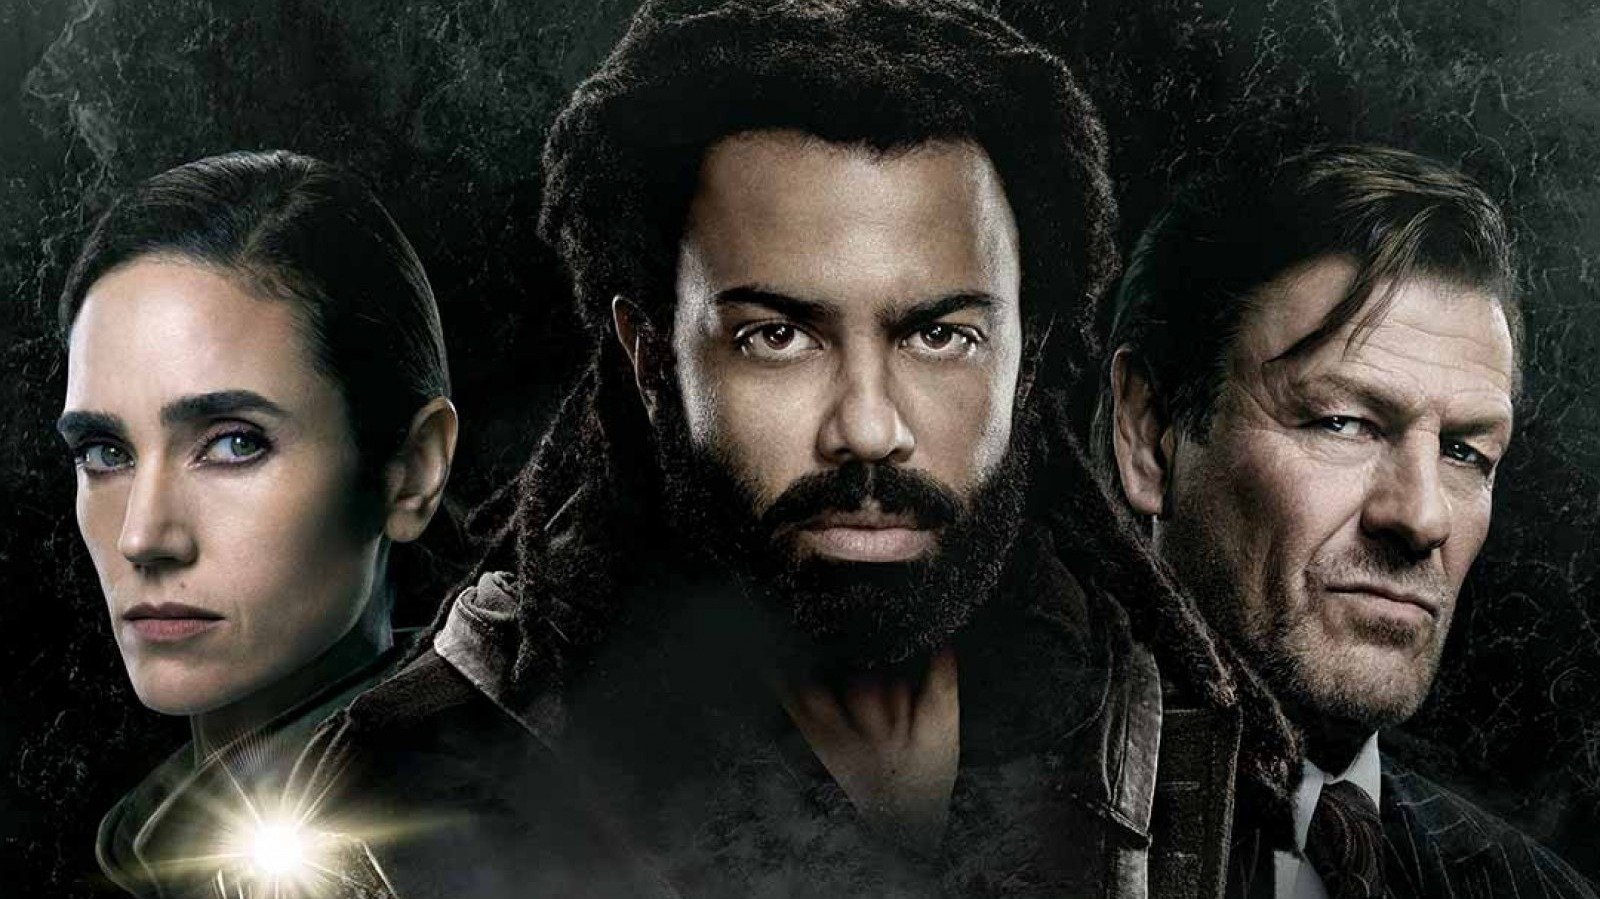 Snowpiercer Cast On Saving The World To Save Your Friends In Season 3 [Interview] - /Film